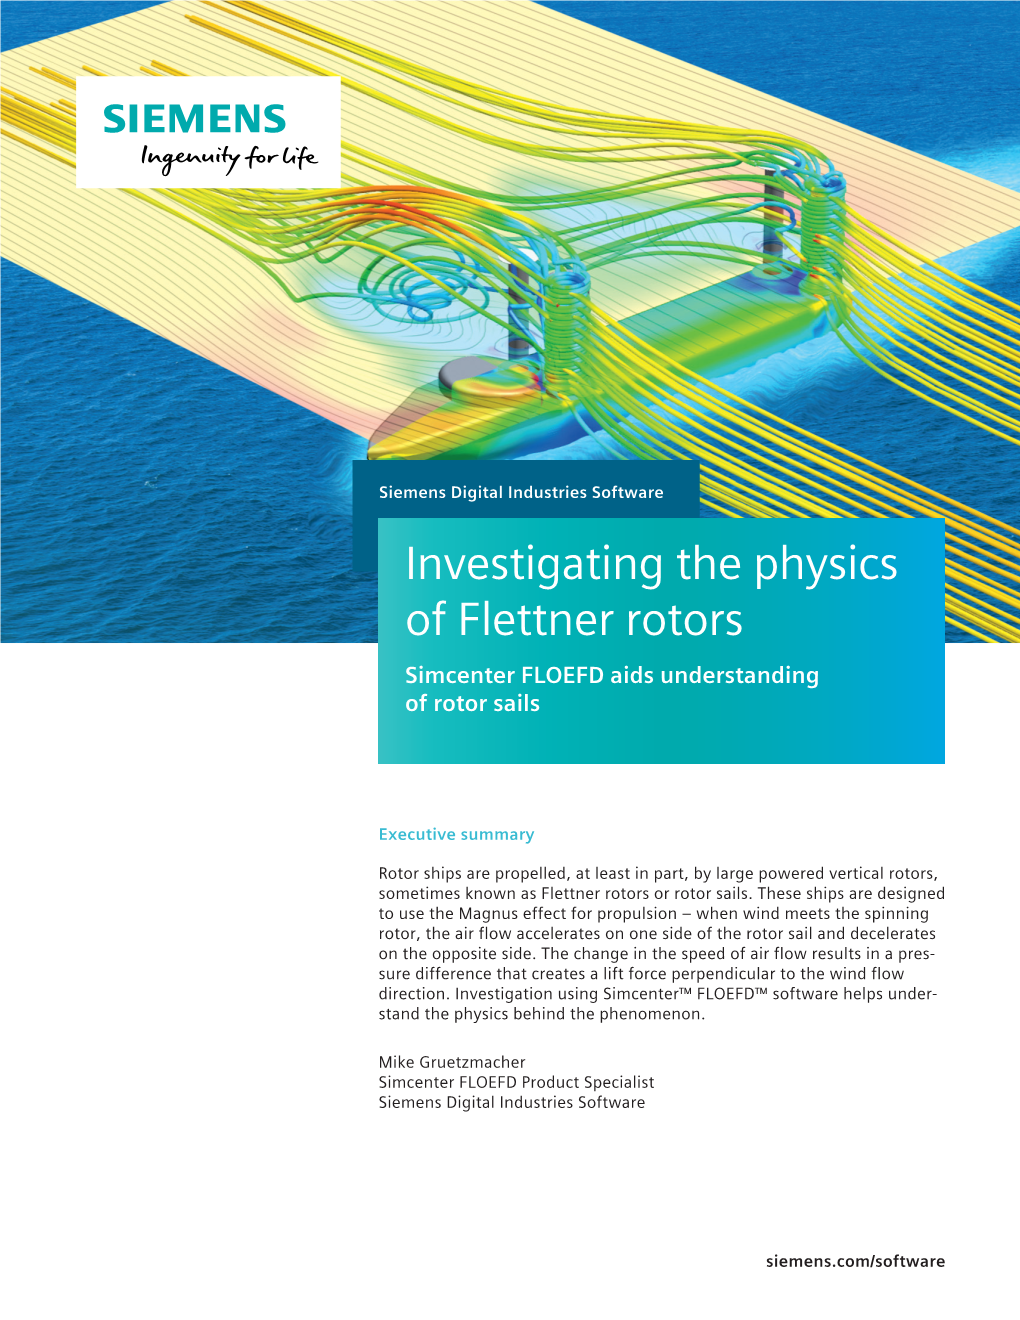 Investigating the Physics of Flettner Rotors Simcenter FLOEFD Aids Understanding of Rotor Sails